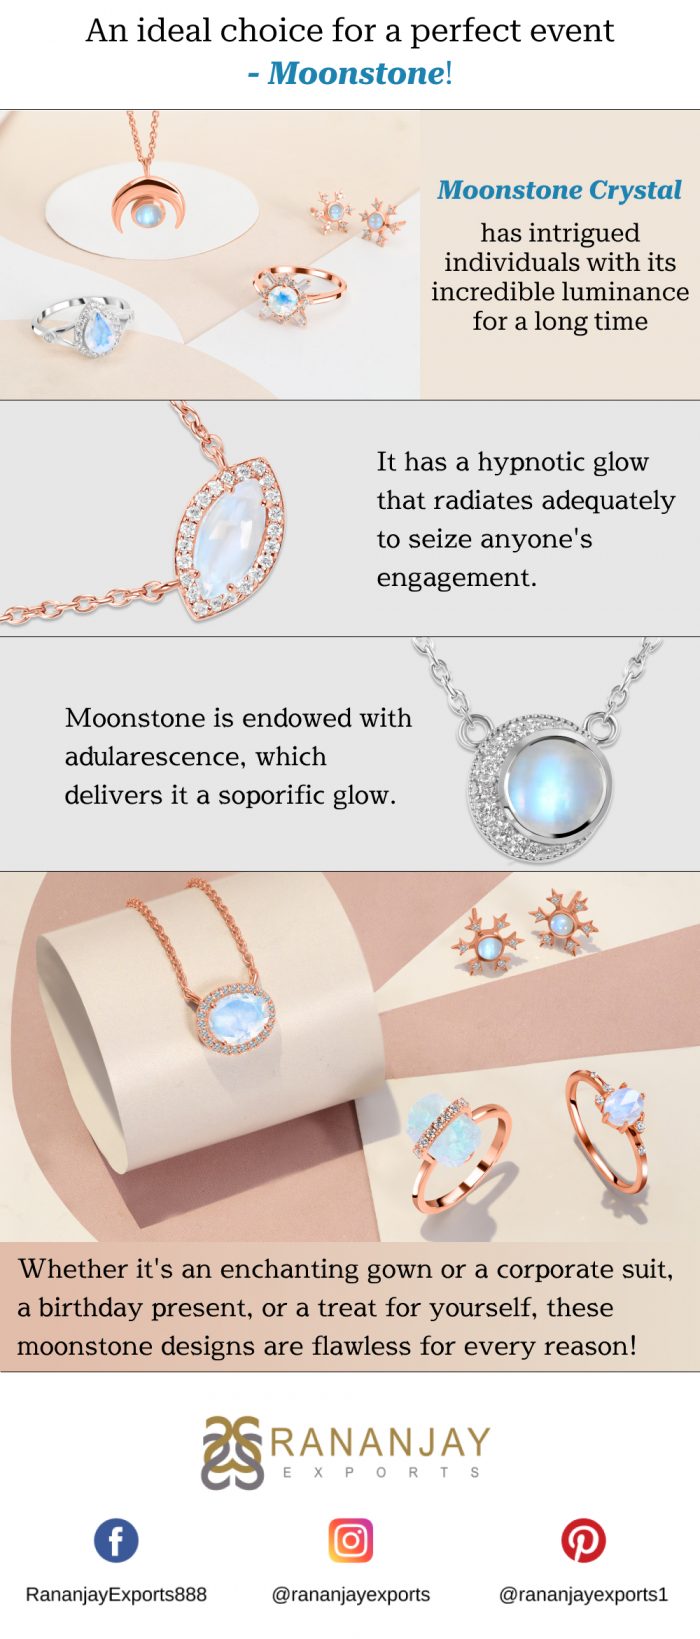 An ideal choice for a perfect event- Moonstone